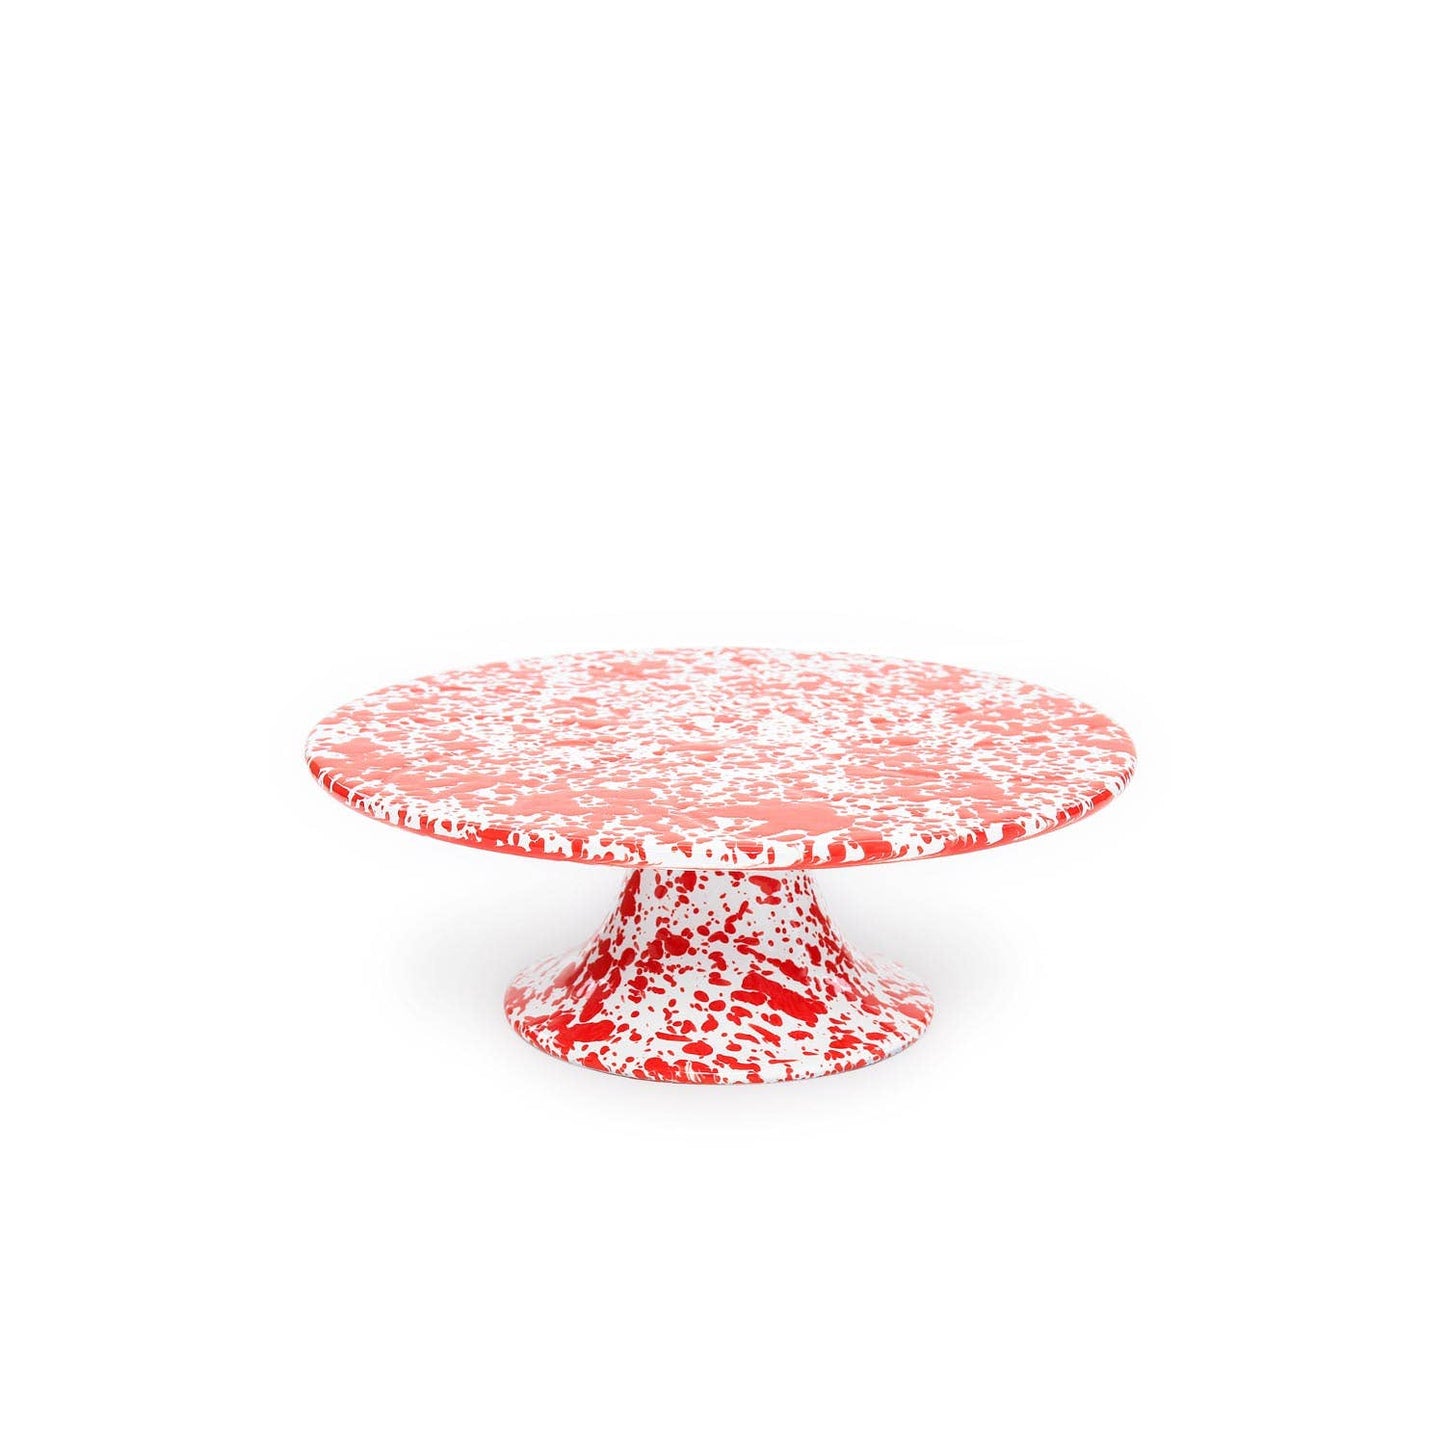 Crow Canyon Home - Splatter Enamelware Cake Stand | Red Splatter - Preston Apothecary